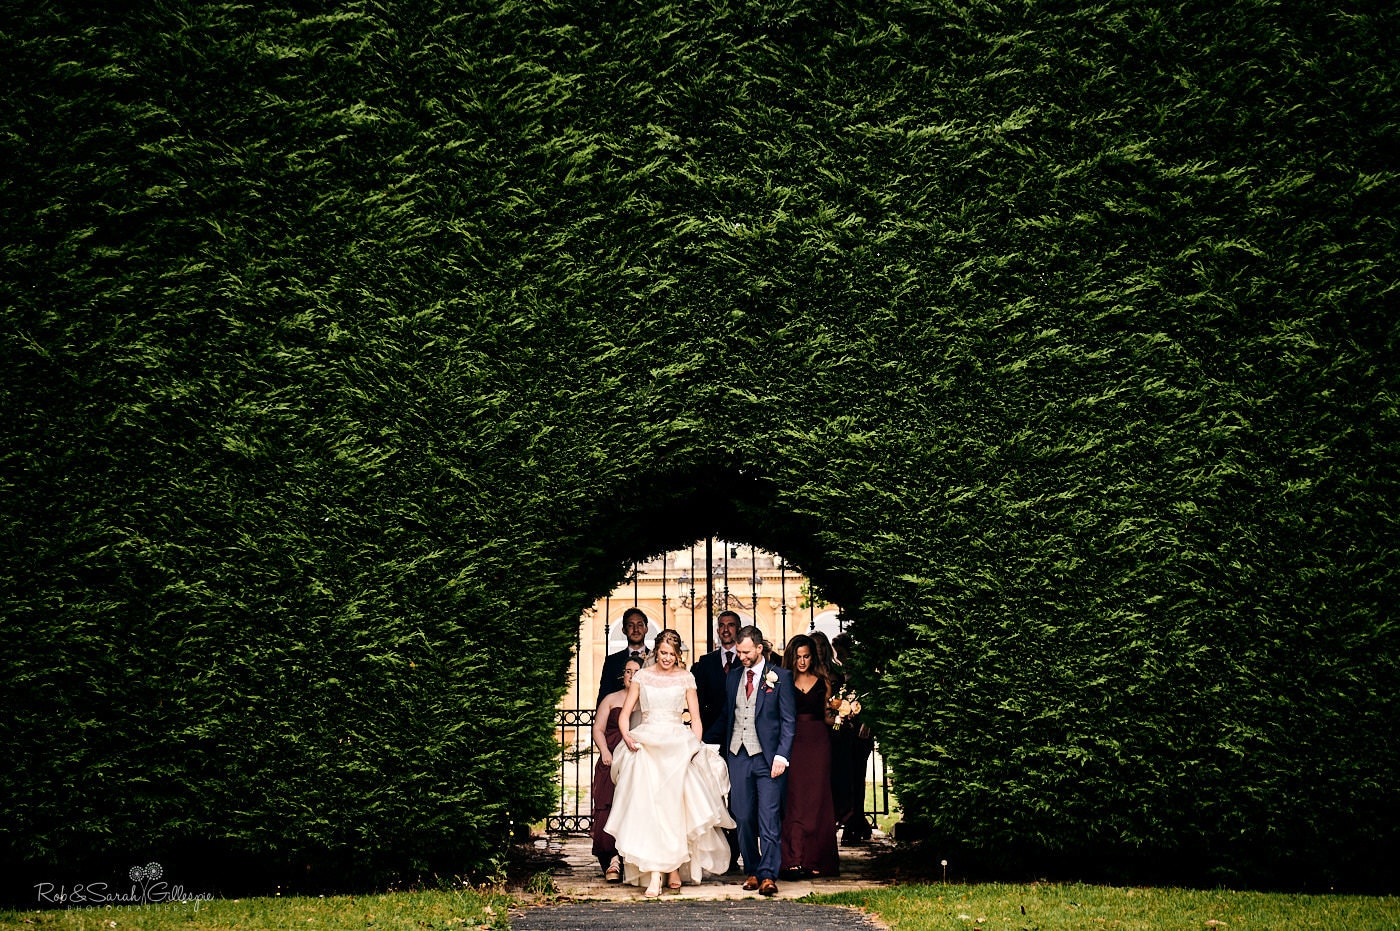 Bride, groom and bridal party walk through grounds at Spring Grove House